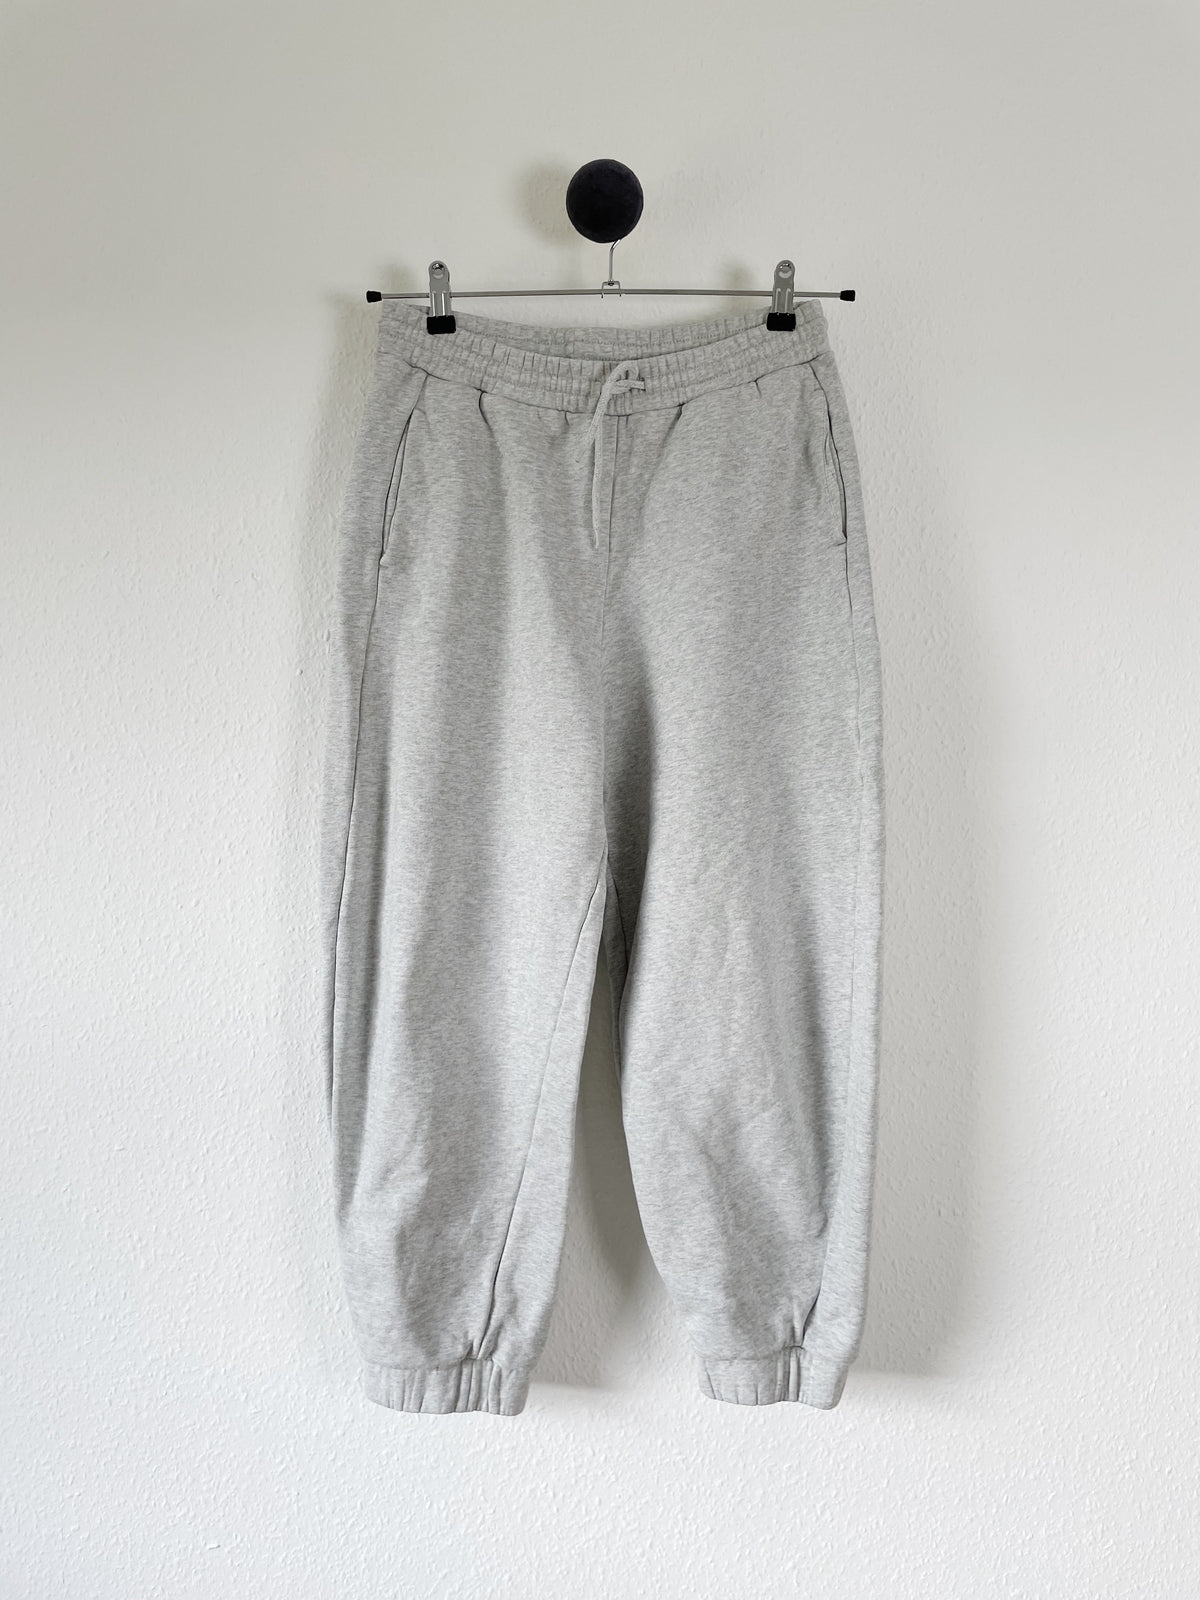 & Other stories sweatpants